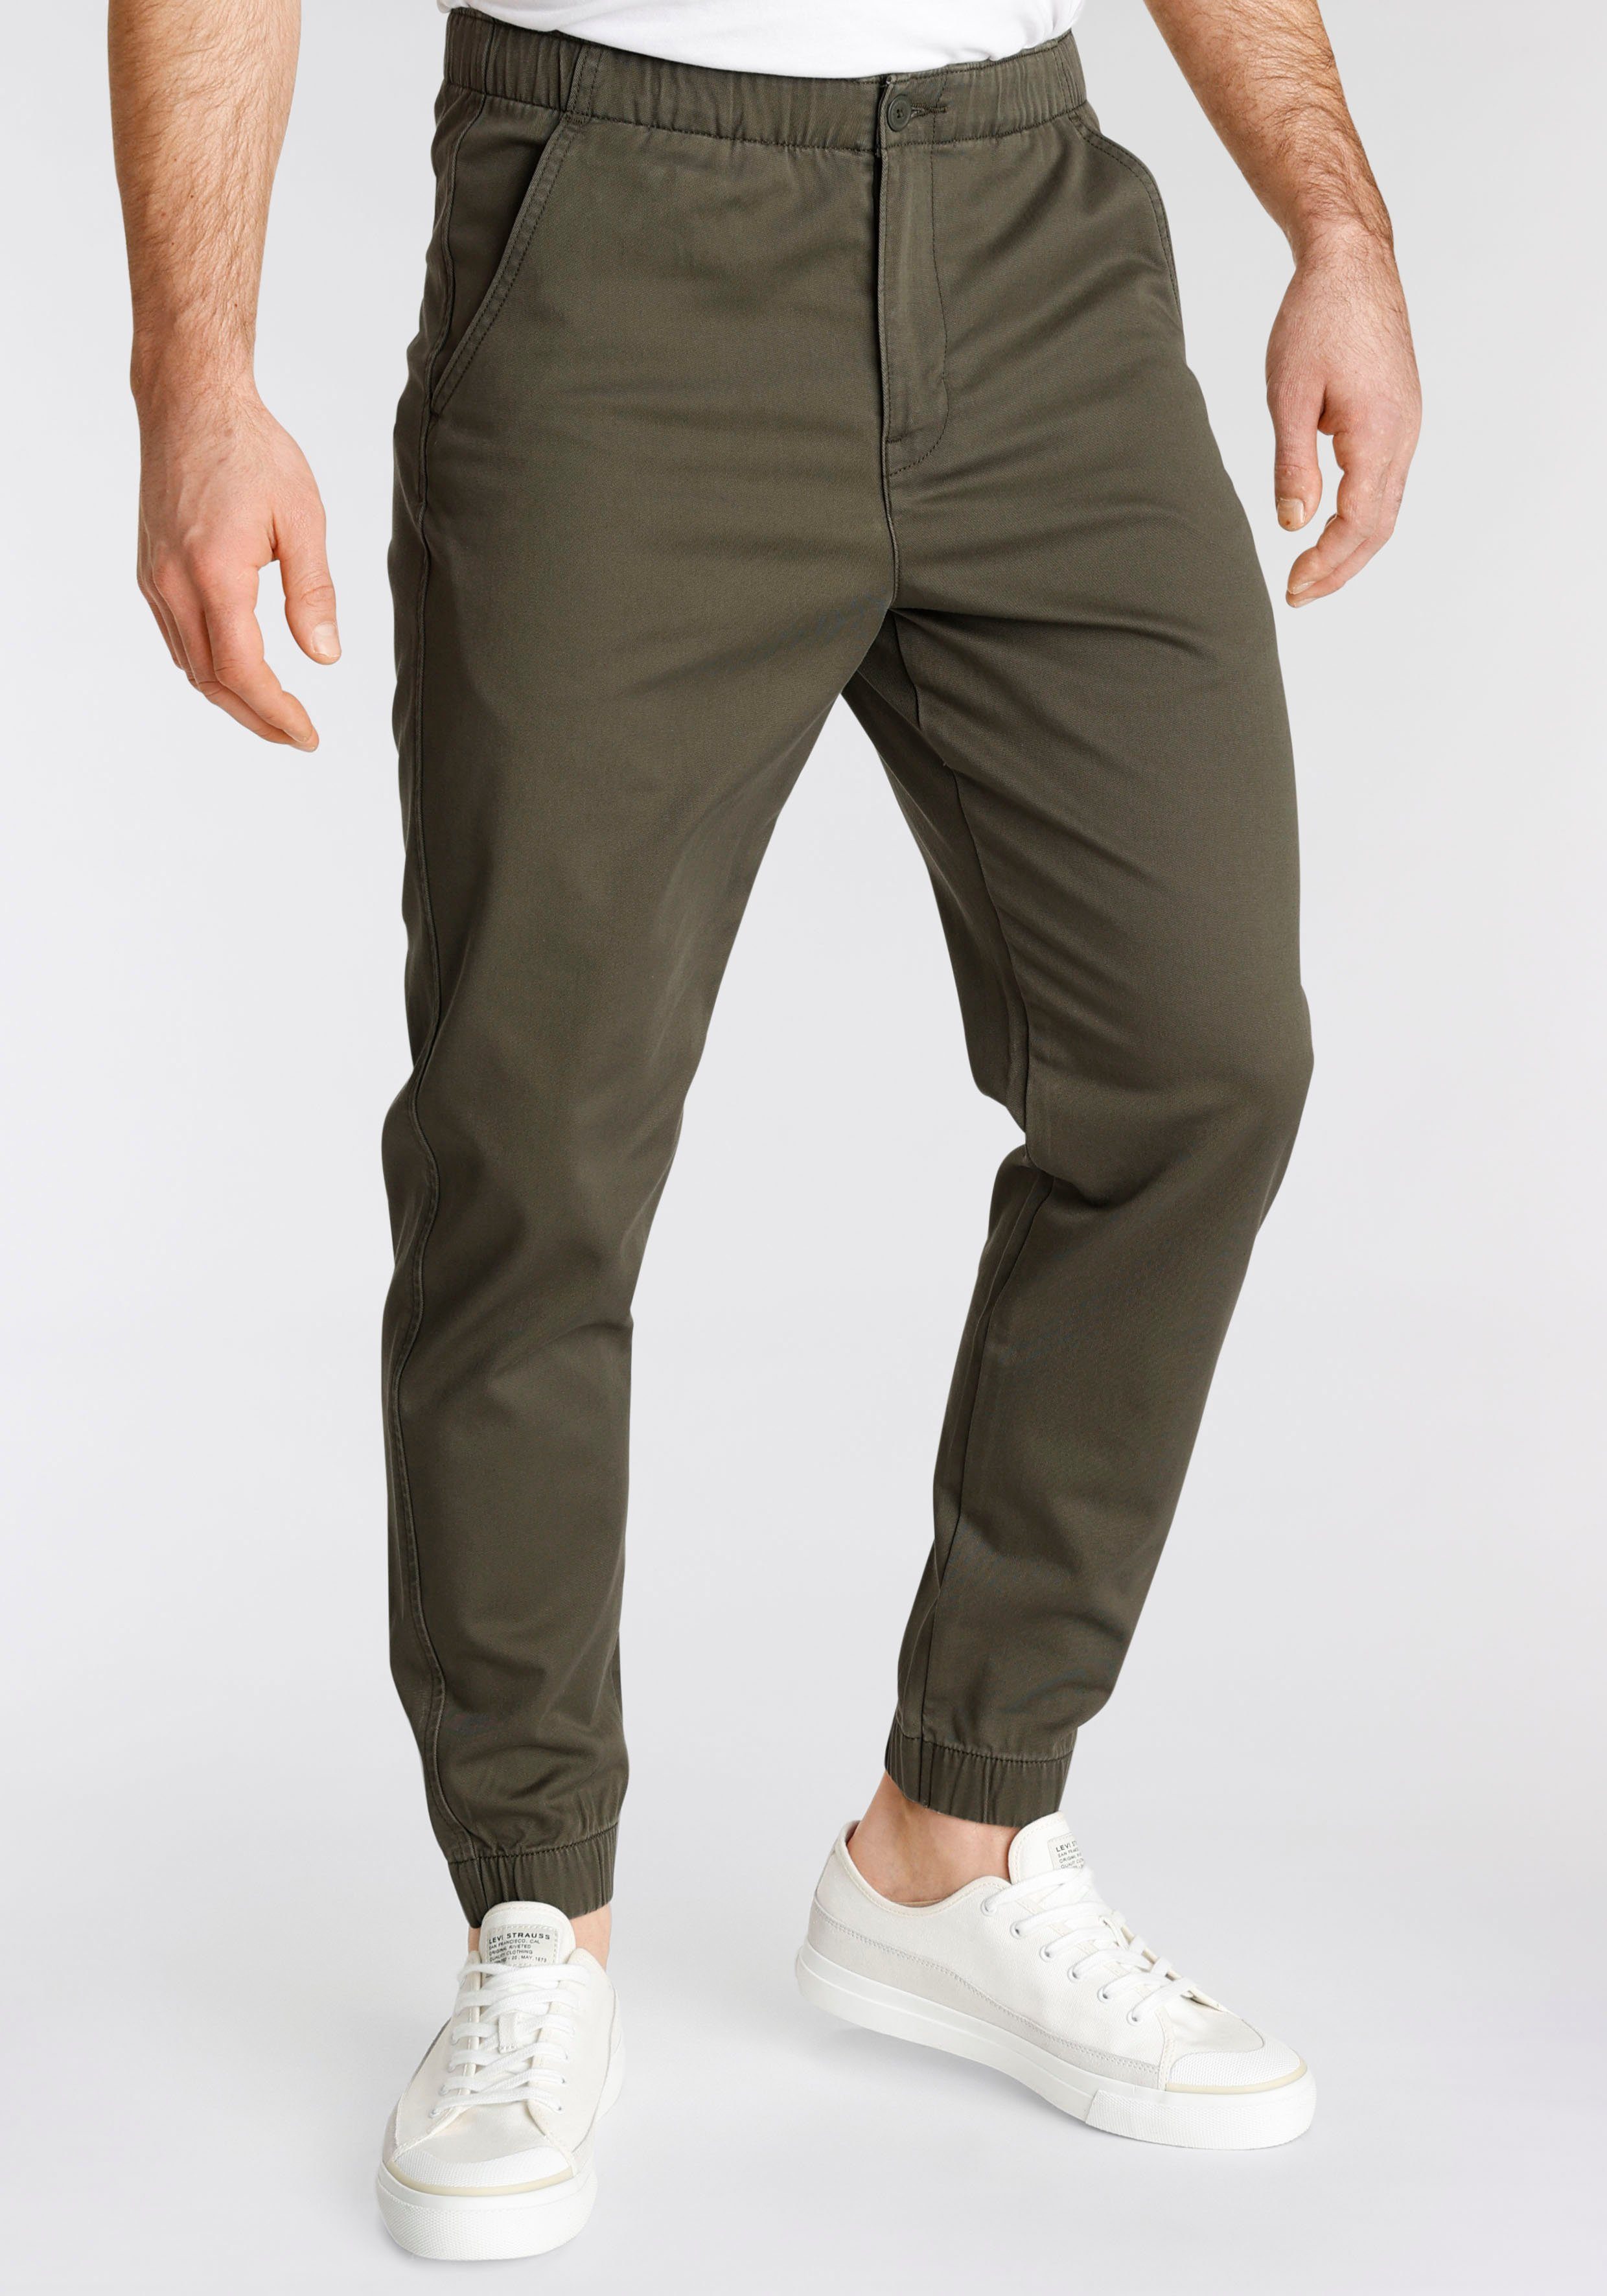 greys CHINO in Chinohose Unifarbe LE Levi's® XX JOGGER Styling III leichtes für